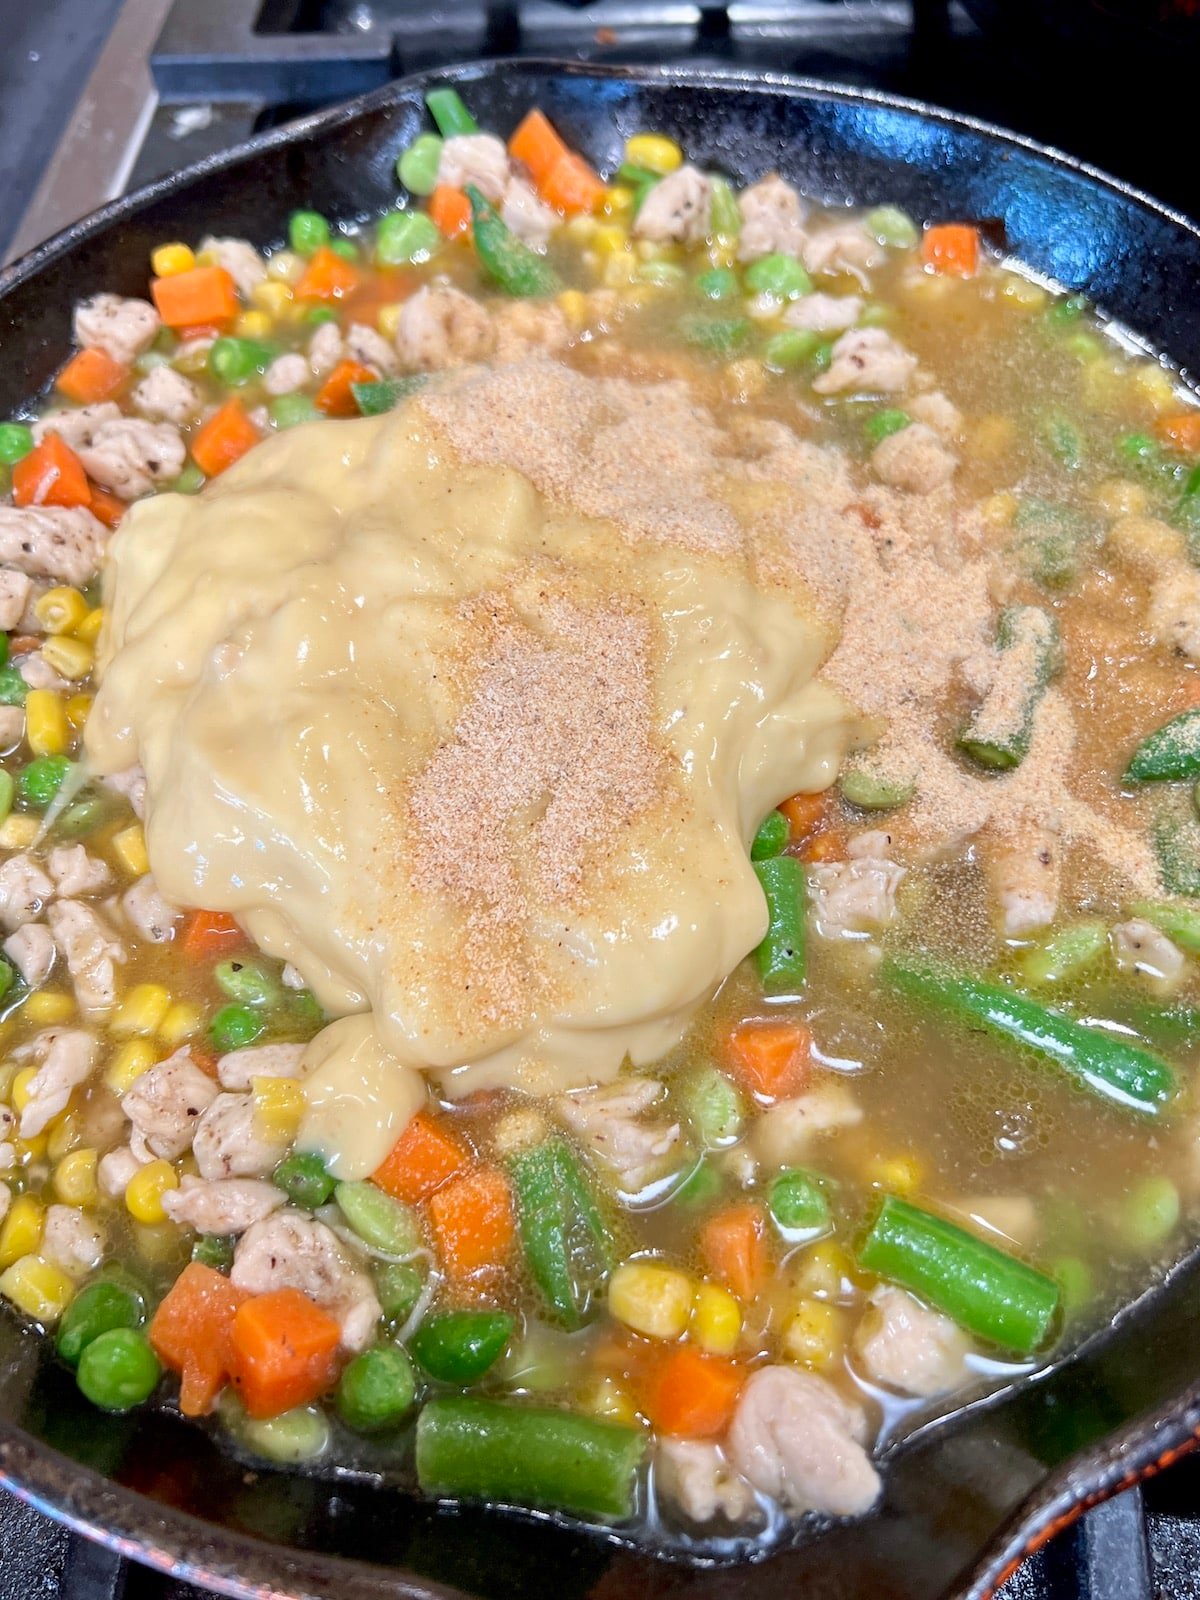 Skillet with chicken pot pie filling - not mixed.